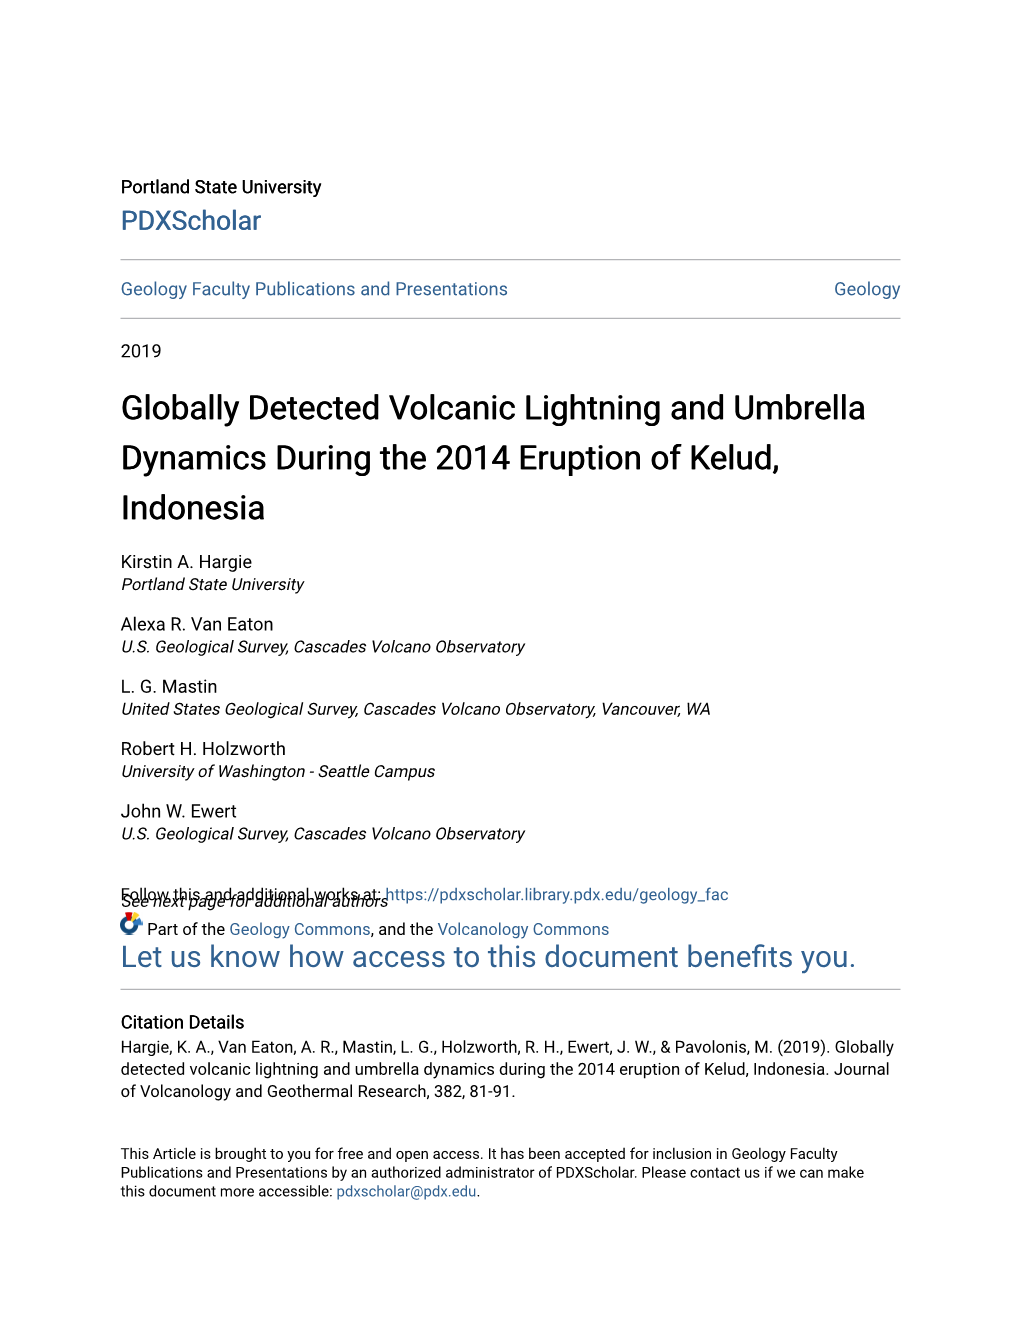 Globally Detected Volcanic Lightning and Umbrella Dynamics During the 2014 Eruption of Kelud, Indonesia